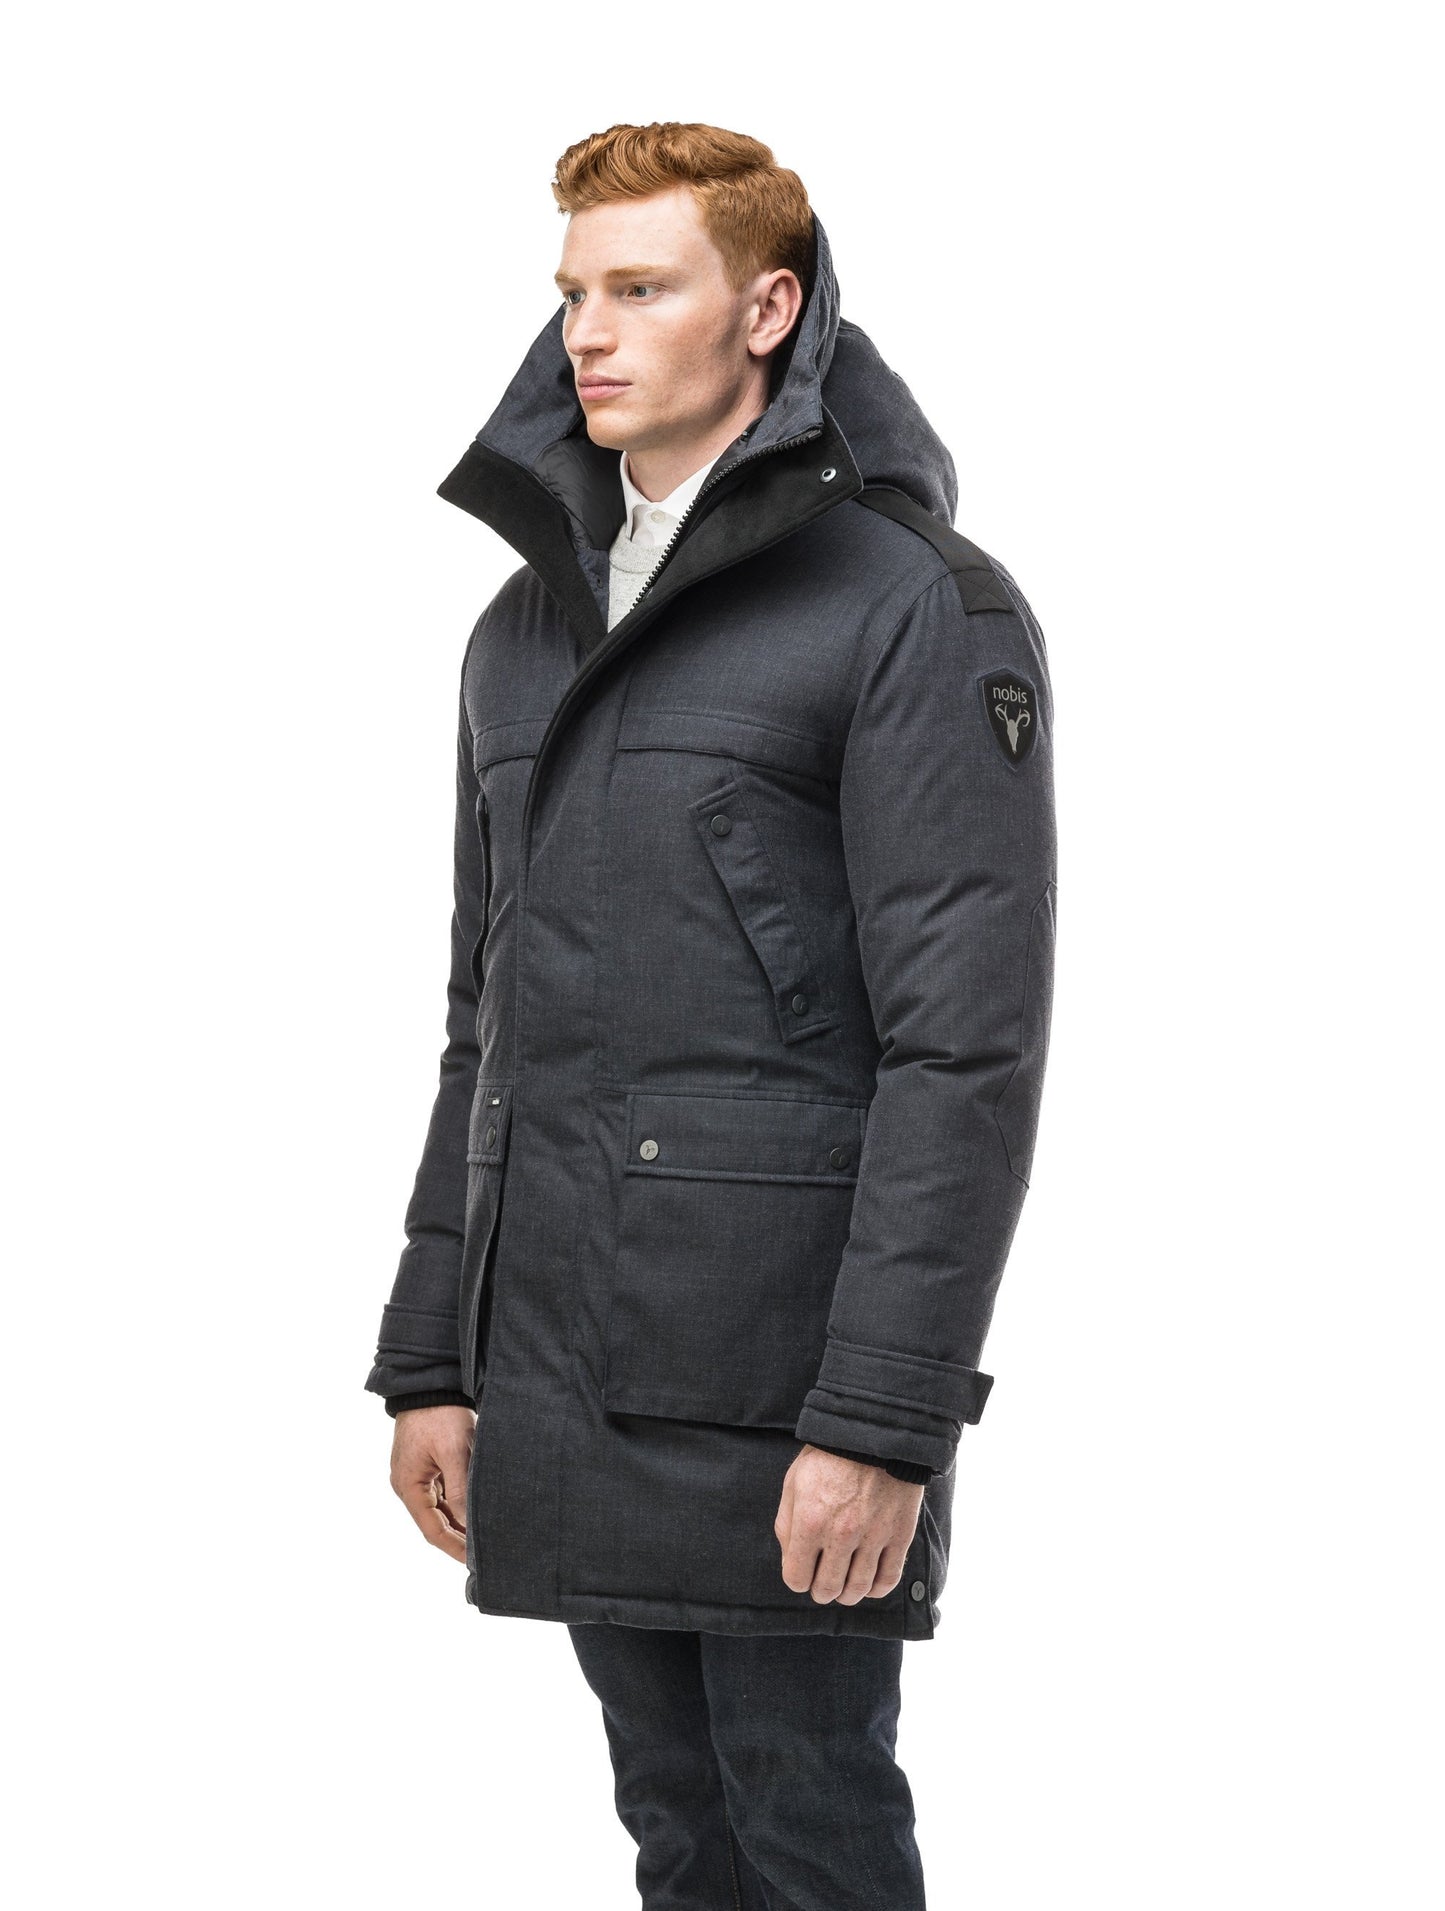 Men's Best Selling Parka the Yatesy is a down filled jacket with a zipper closure and magnetic placket in H. Navy